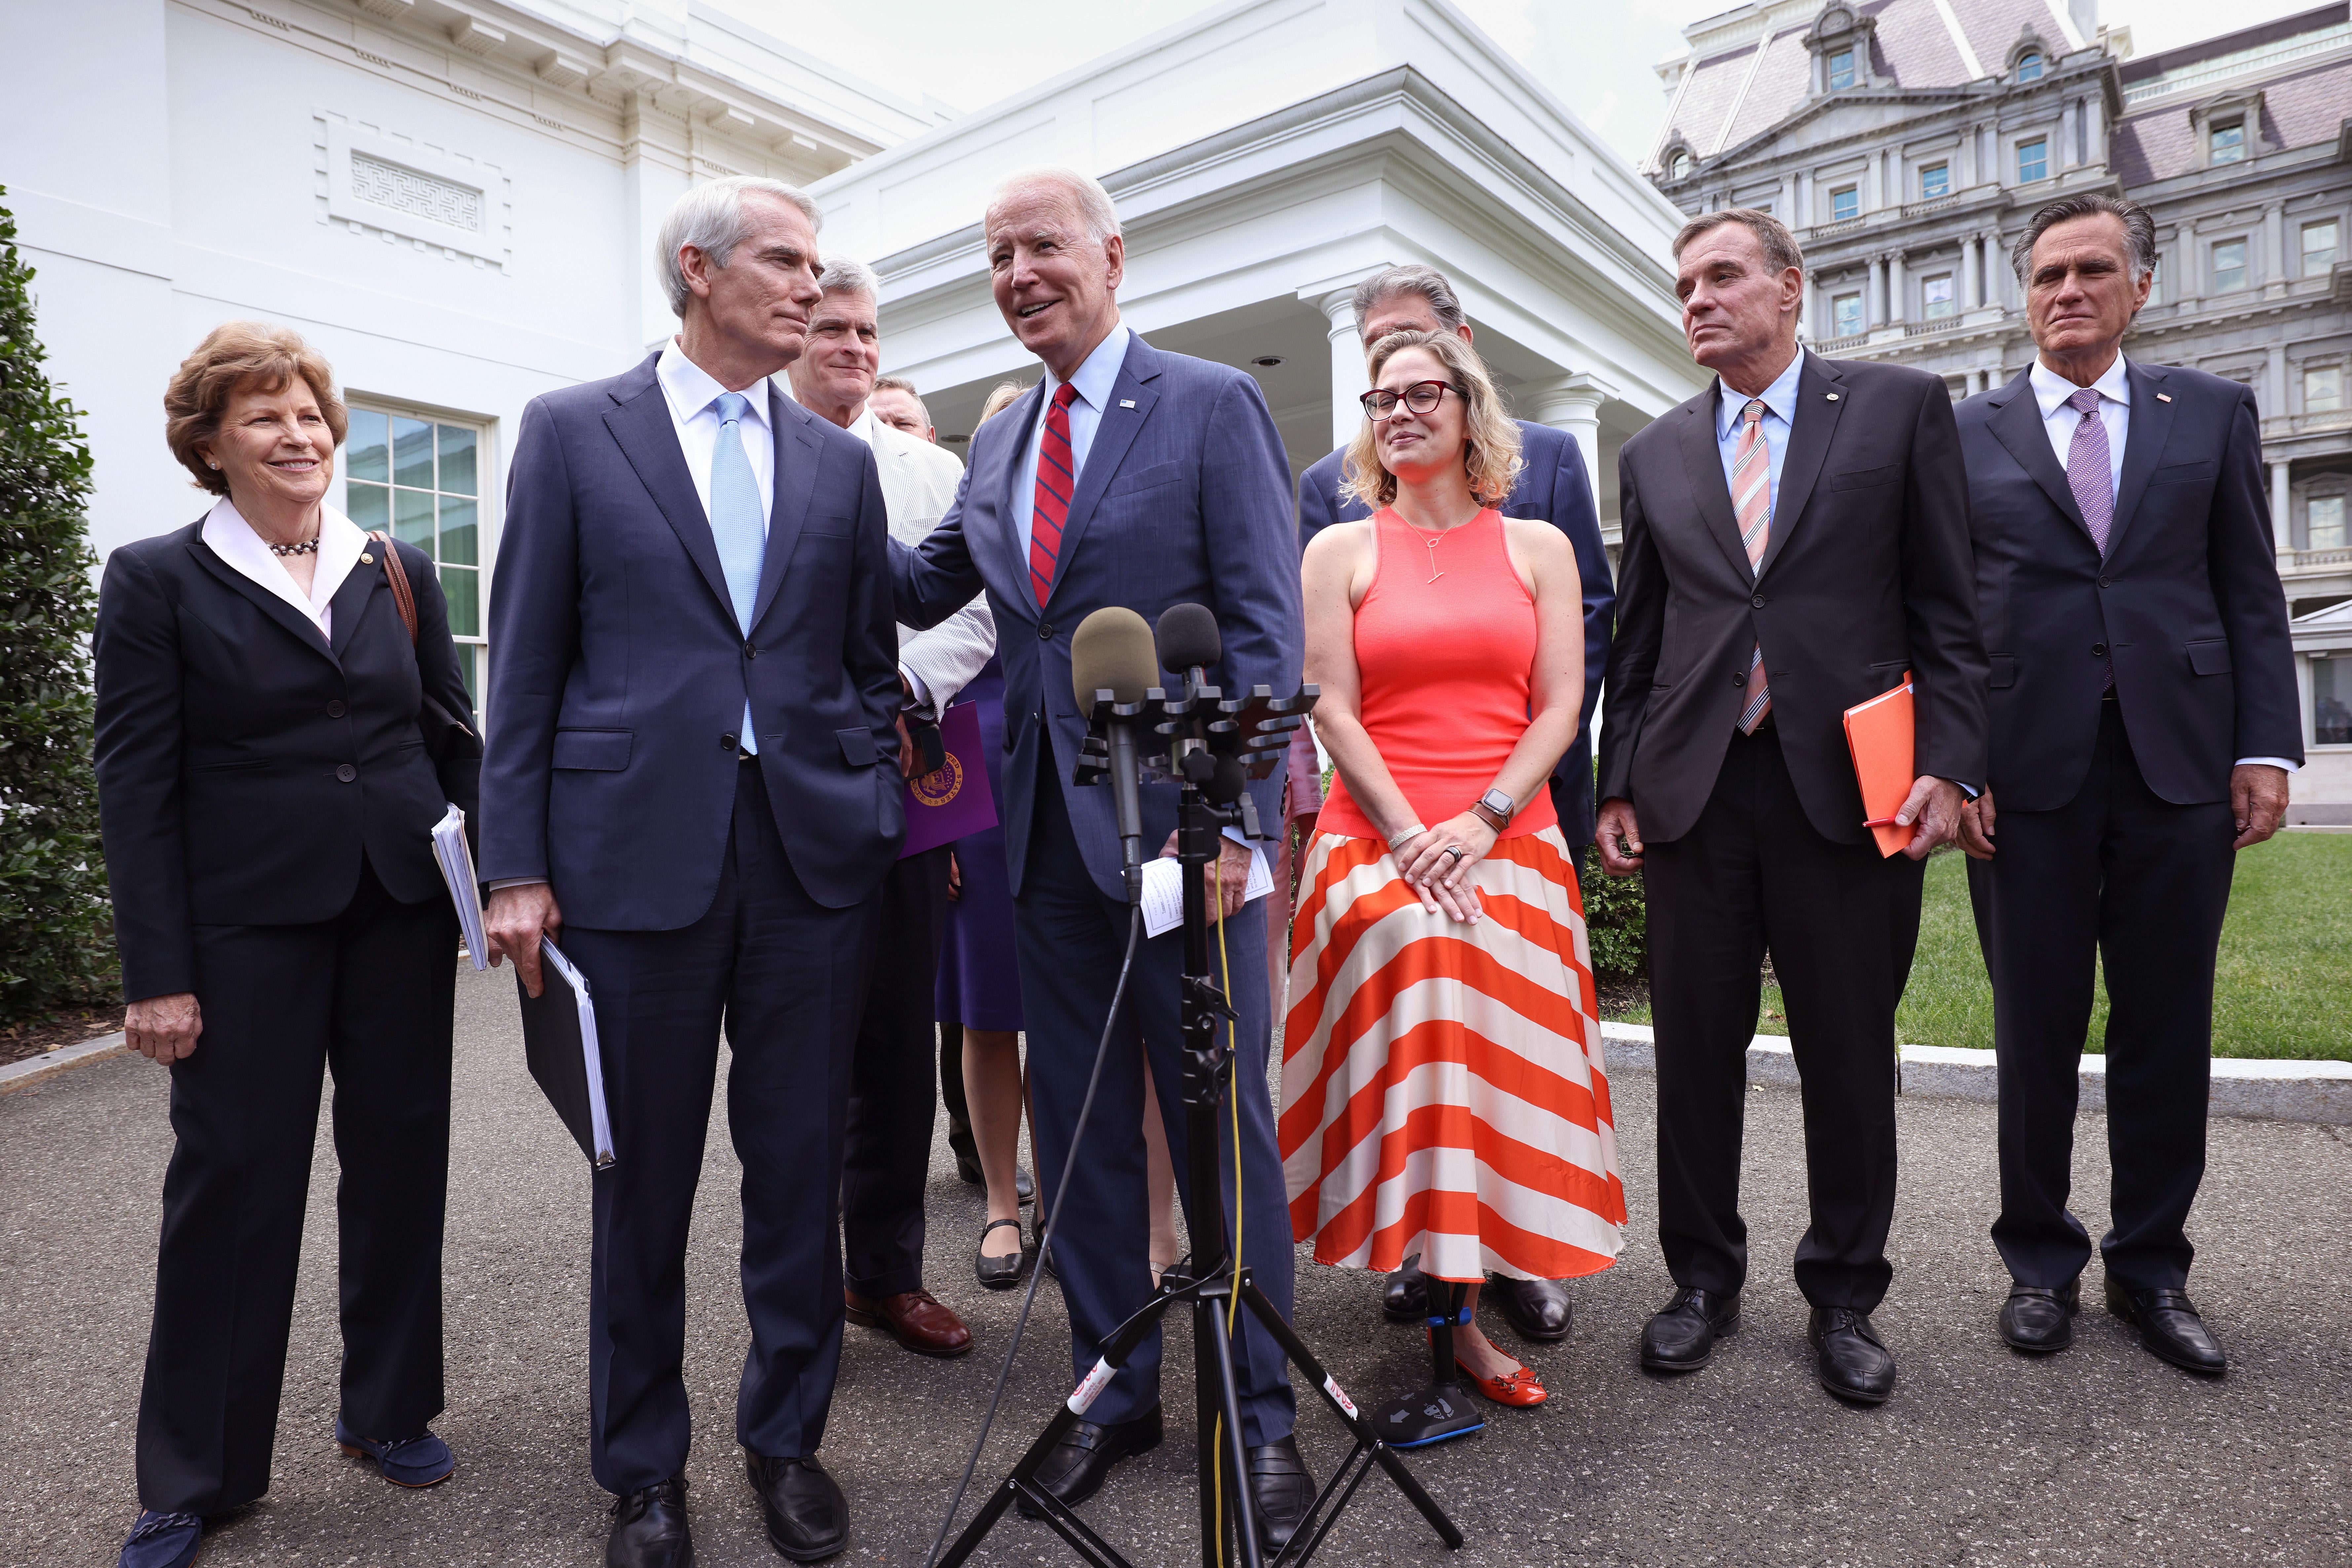 Biden stands smiling with the group in front of the White House